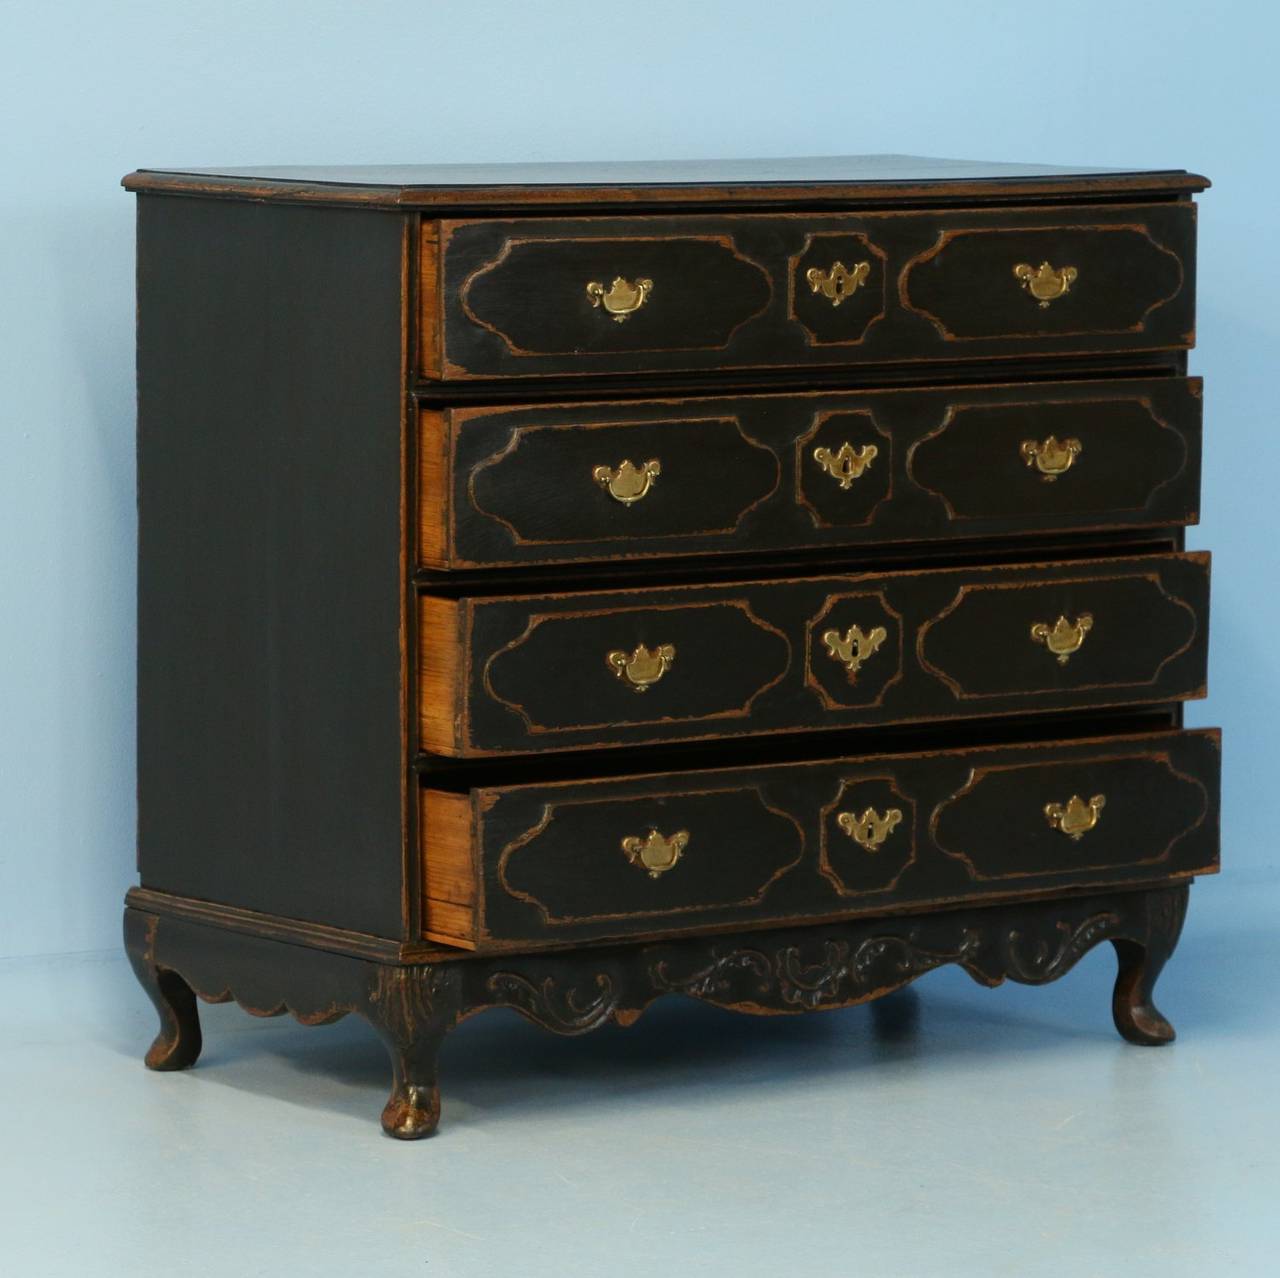 This dramatic chest of four drawers has decorative panels on each drawer that add to the visual appeal. It has recently been given a black painted finish, bringing out the dimension of the panels and lovely carving at base, adding to the overall